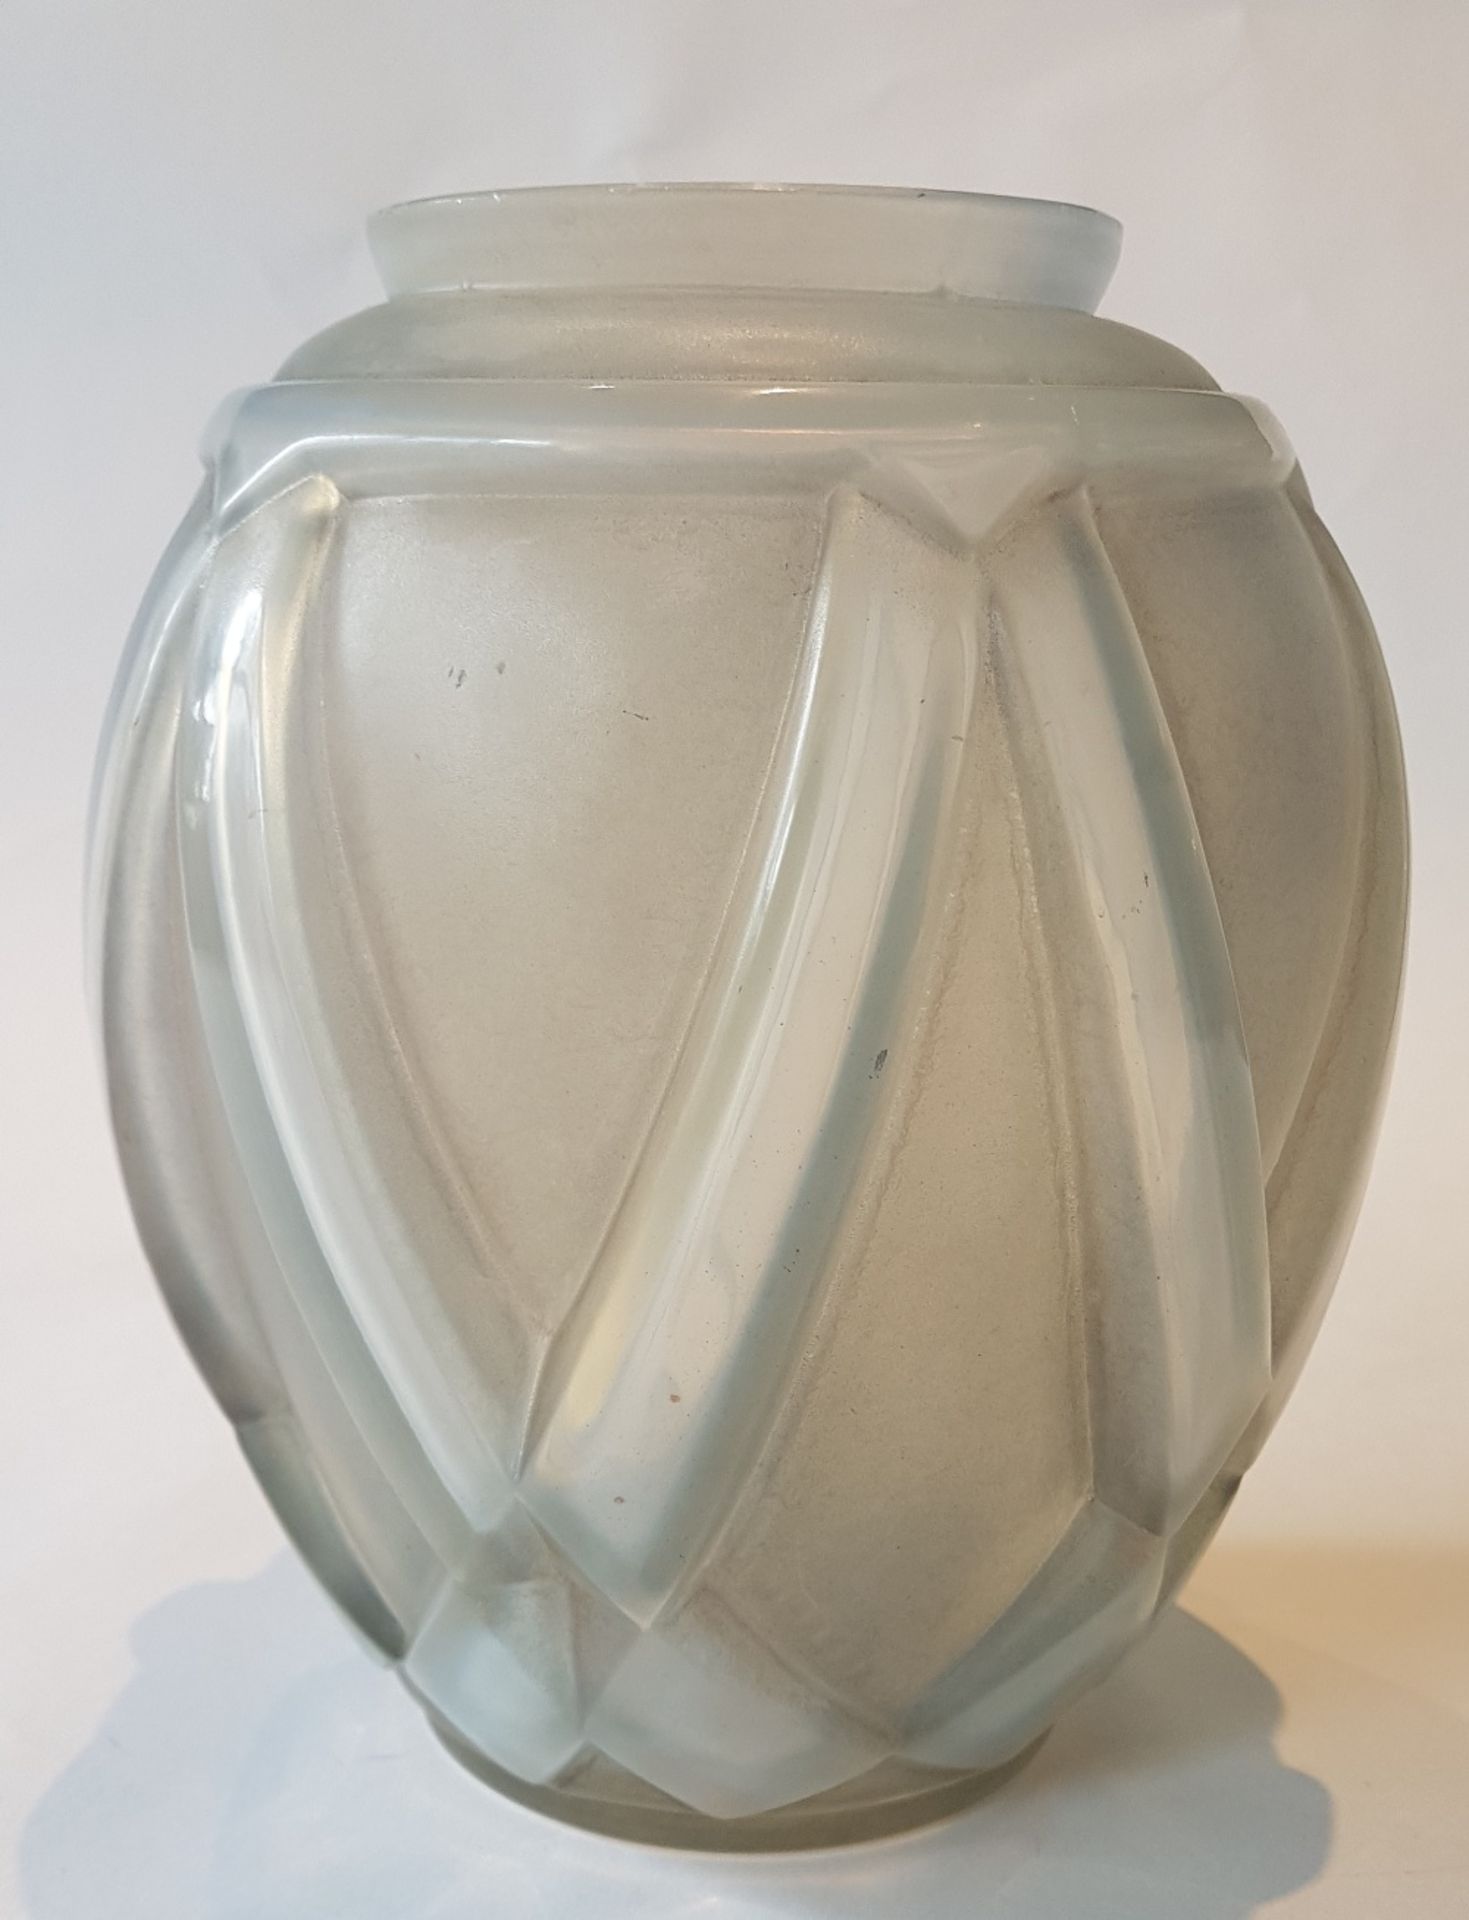 André Hunebelle (1896-1985)Etruscan; Opalescent white satinised glass vase. Signed. H: 19 cm